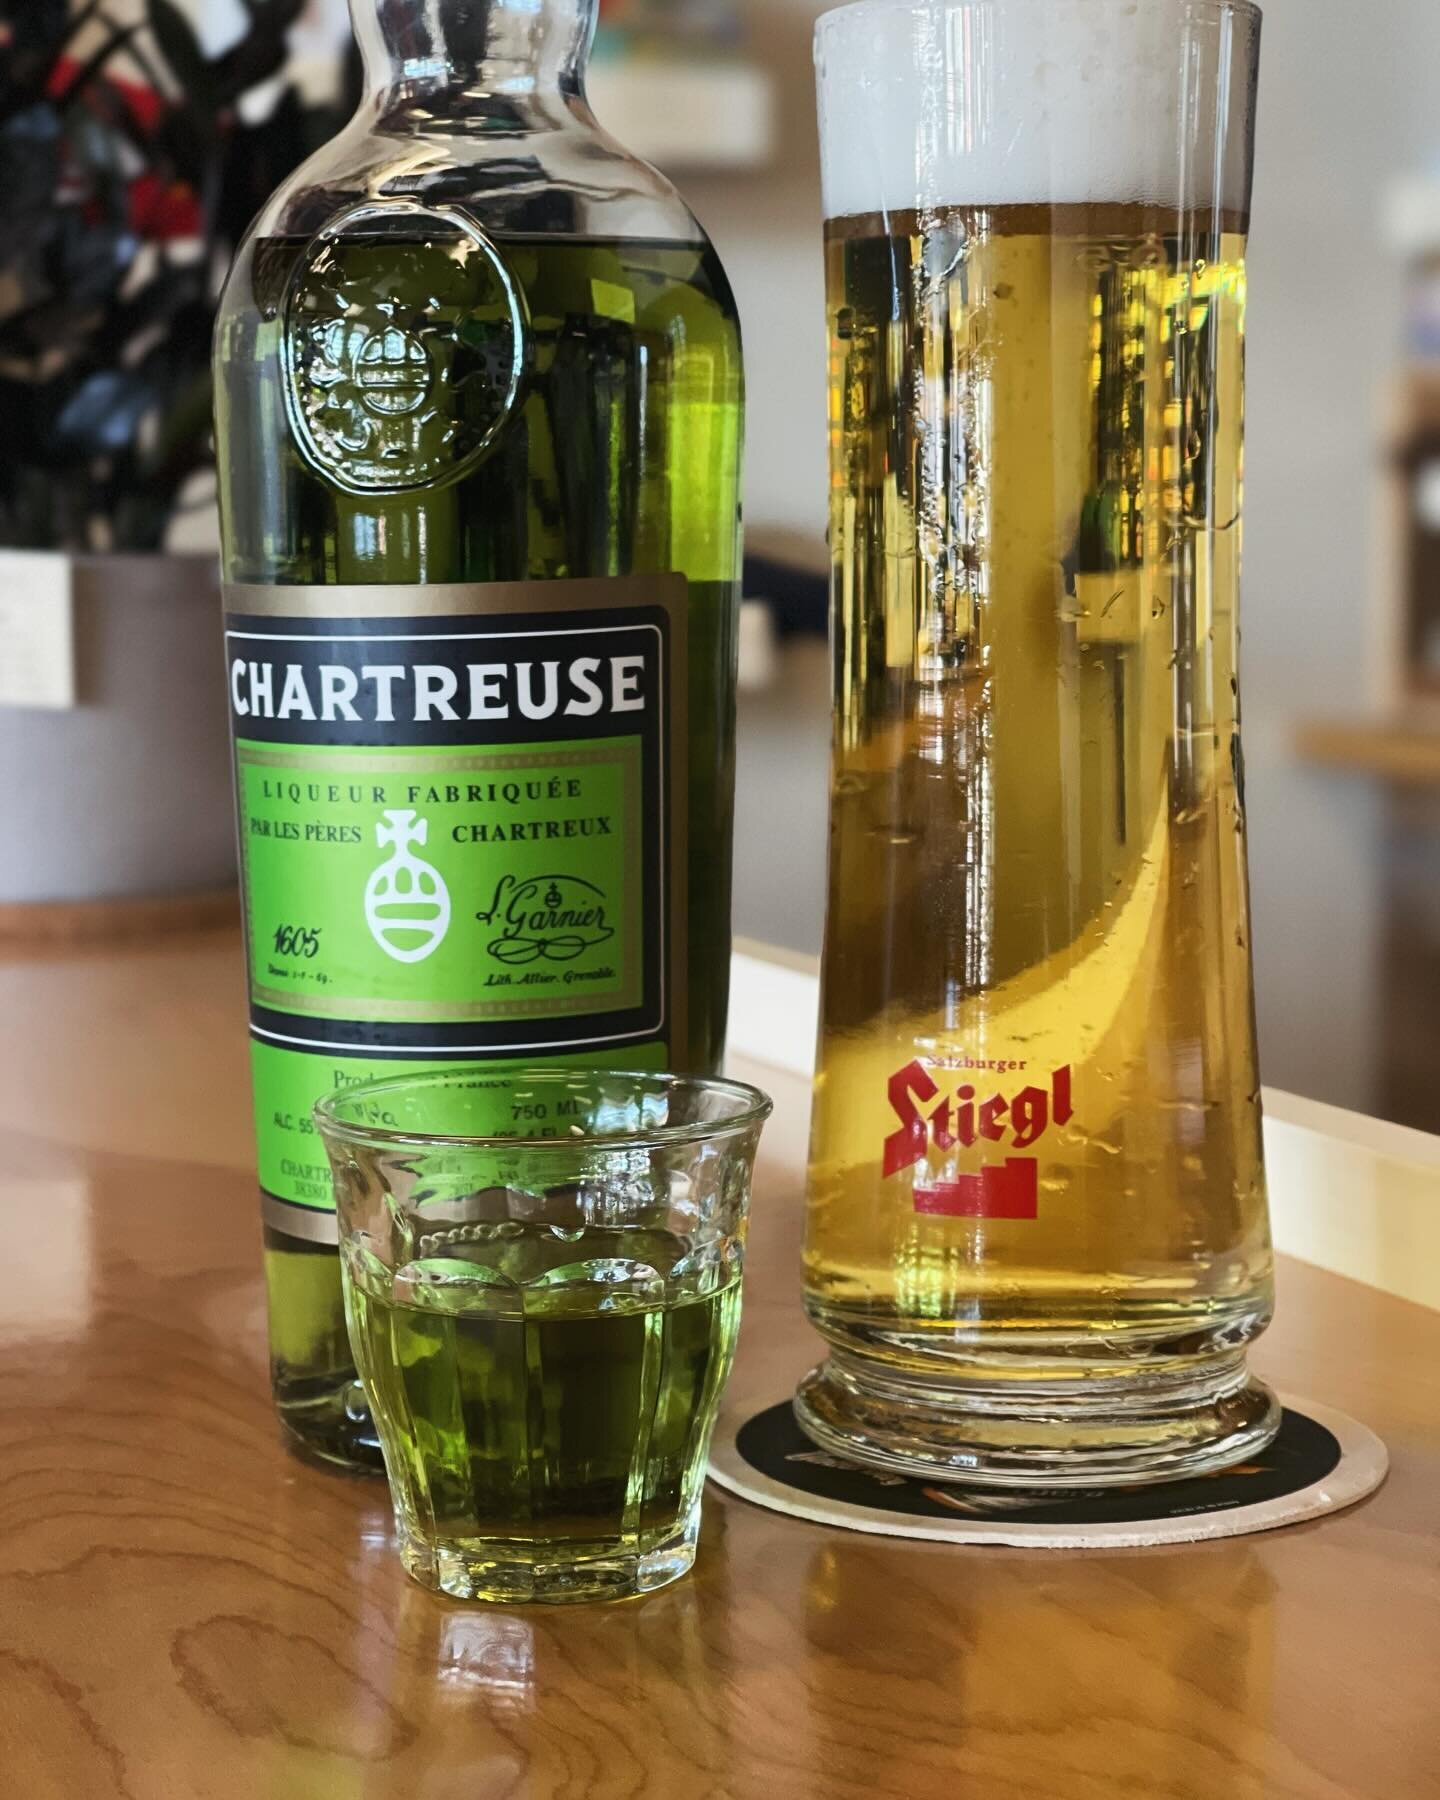 We got your green beer special right here.

Chartreuse and Stiegl. $18. 

*Stiegl does not come in that glass*: this is merely a tease. 

Here till 9pm!